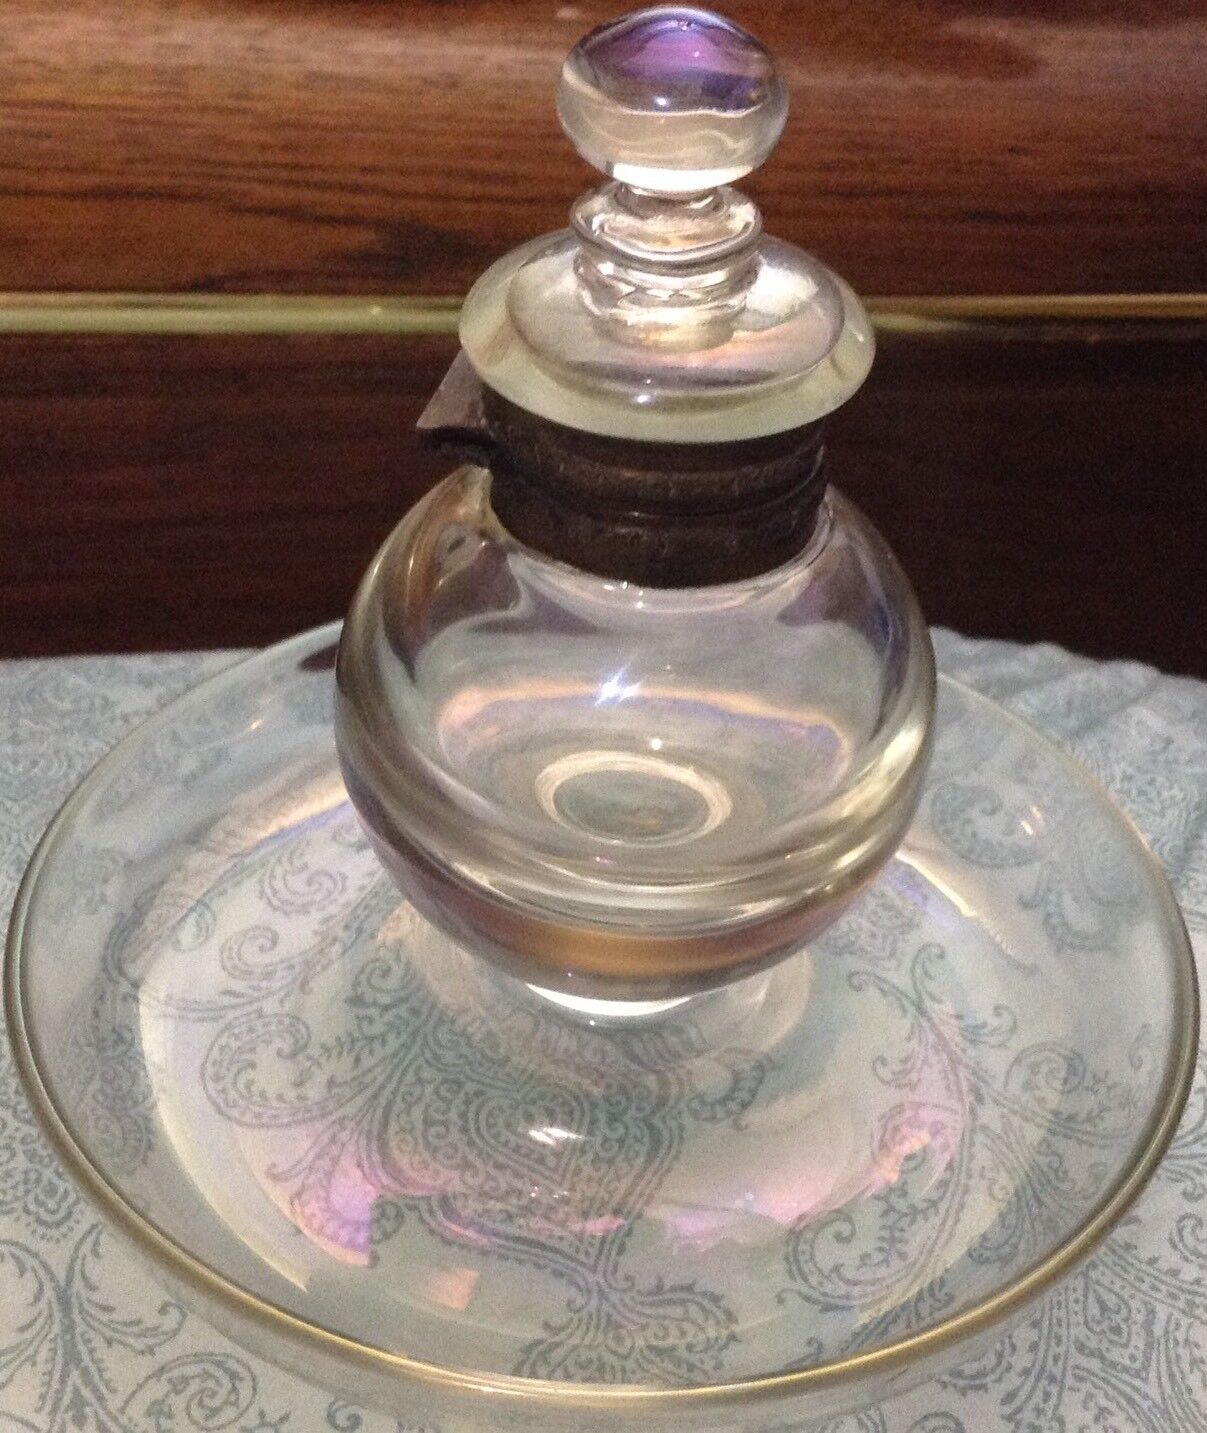 Antique Inkwell ~ Clear  Glass Reddish/Purple Tint noted  Brass Hinged Lid   